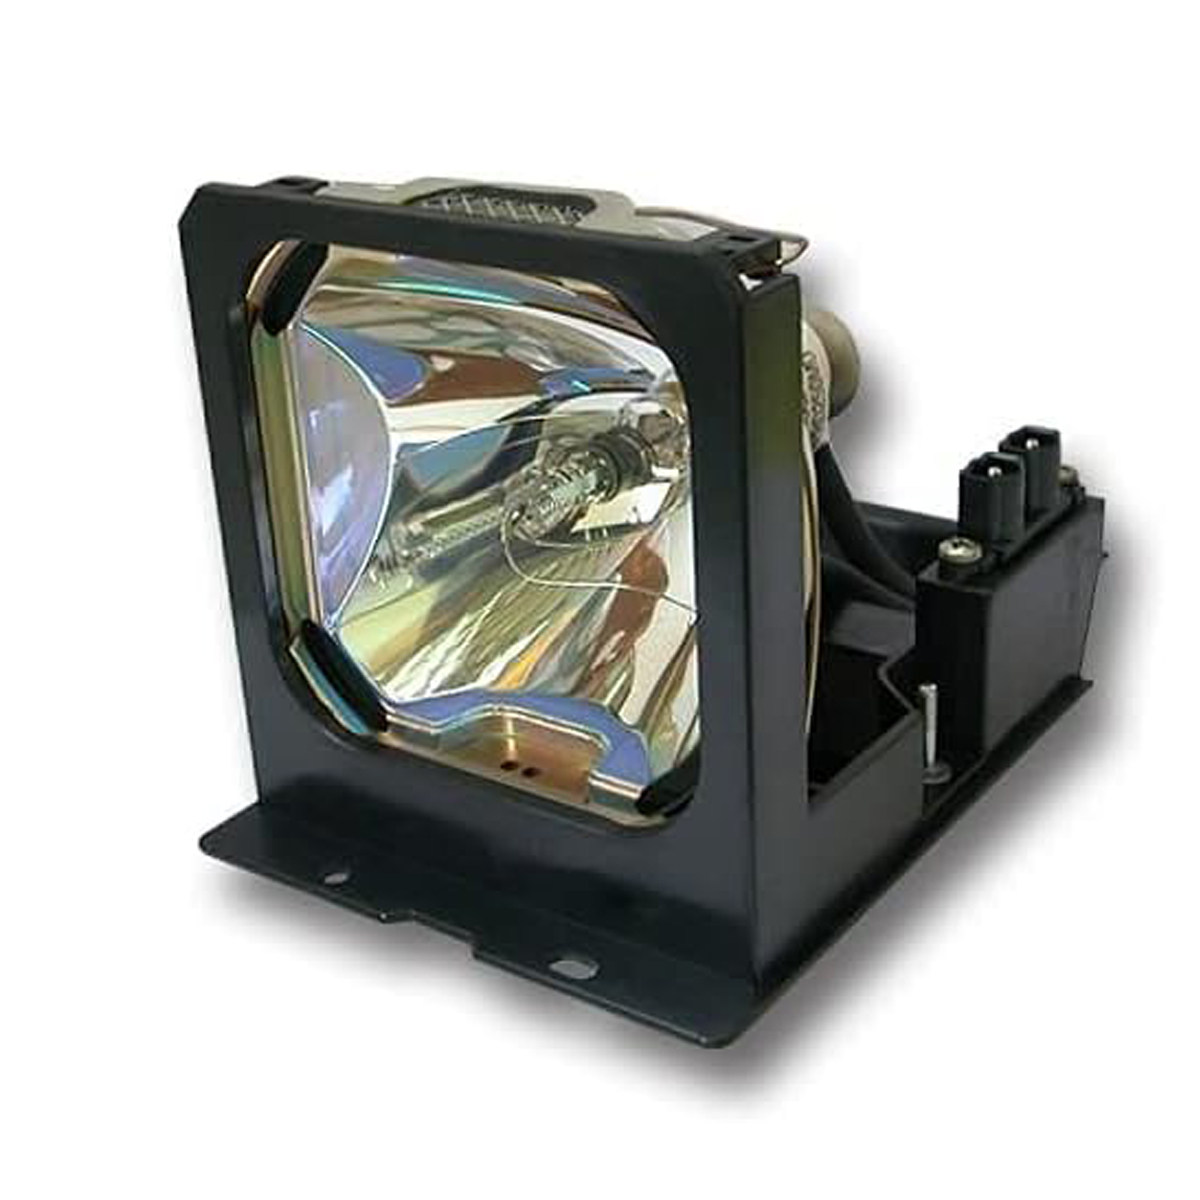 Replacement Projector lamp VLT-X400LP For MITSUBISHI X390 X400 X400B